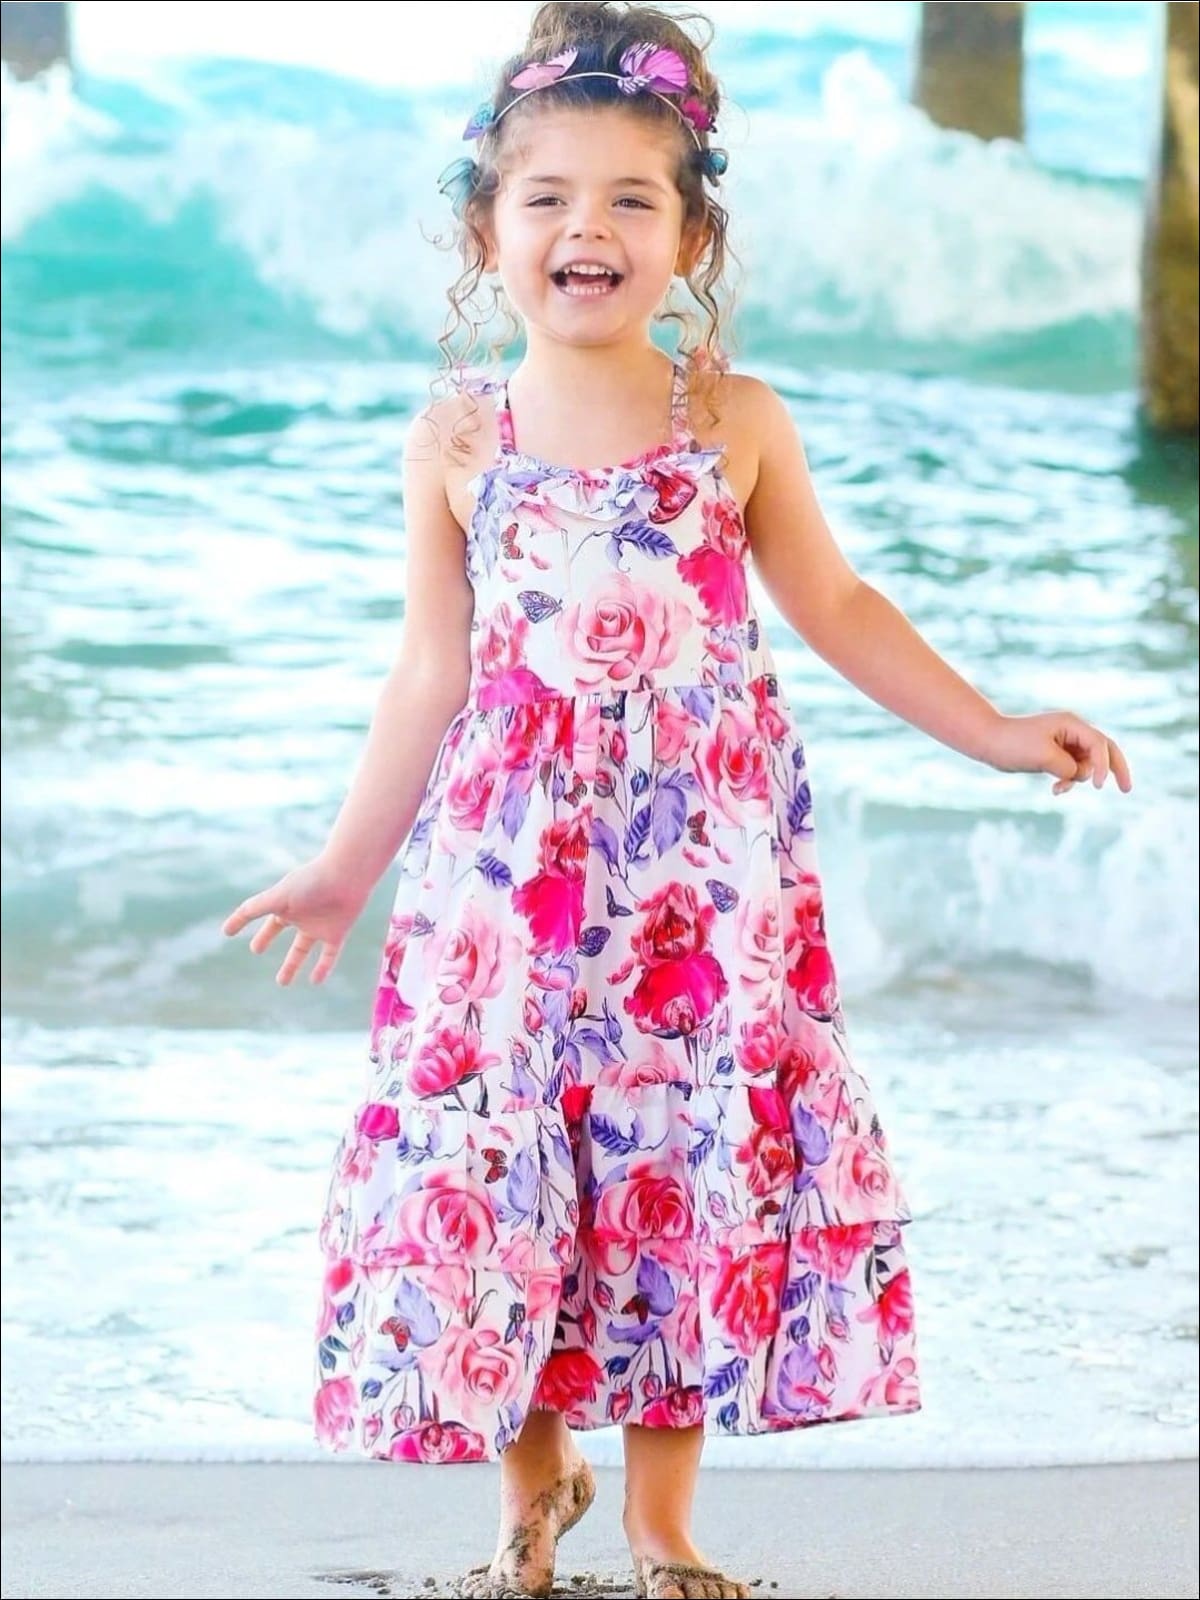 Girls Floral Flutter Sleeve Strappy Back Boho Maxi Special Occasion Party Dress - Similar To Image / 4T - Girls Spring Casual Dress